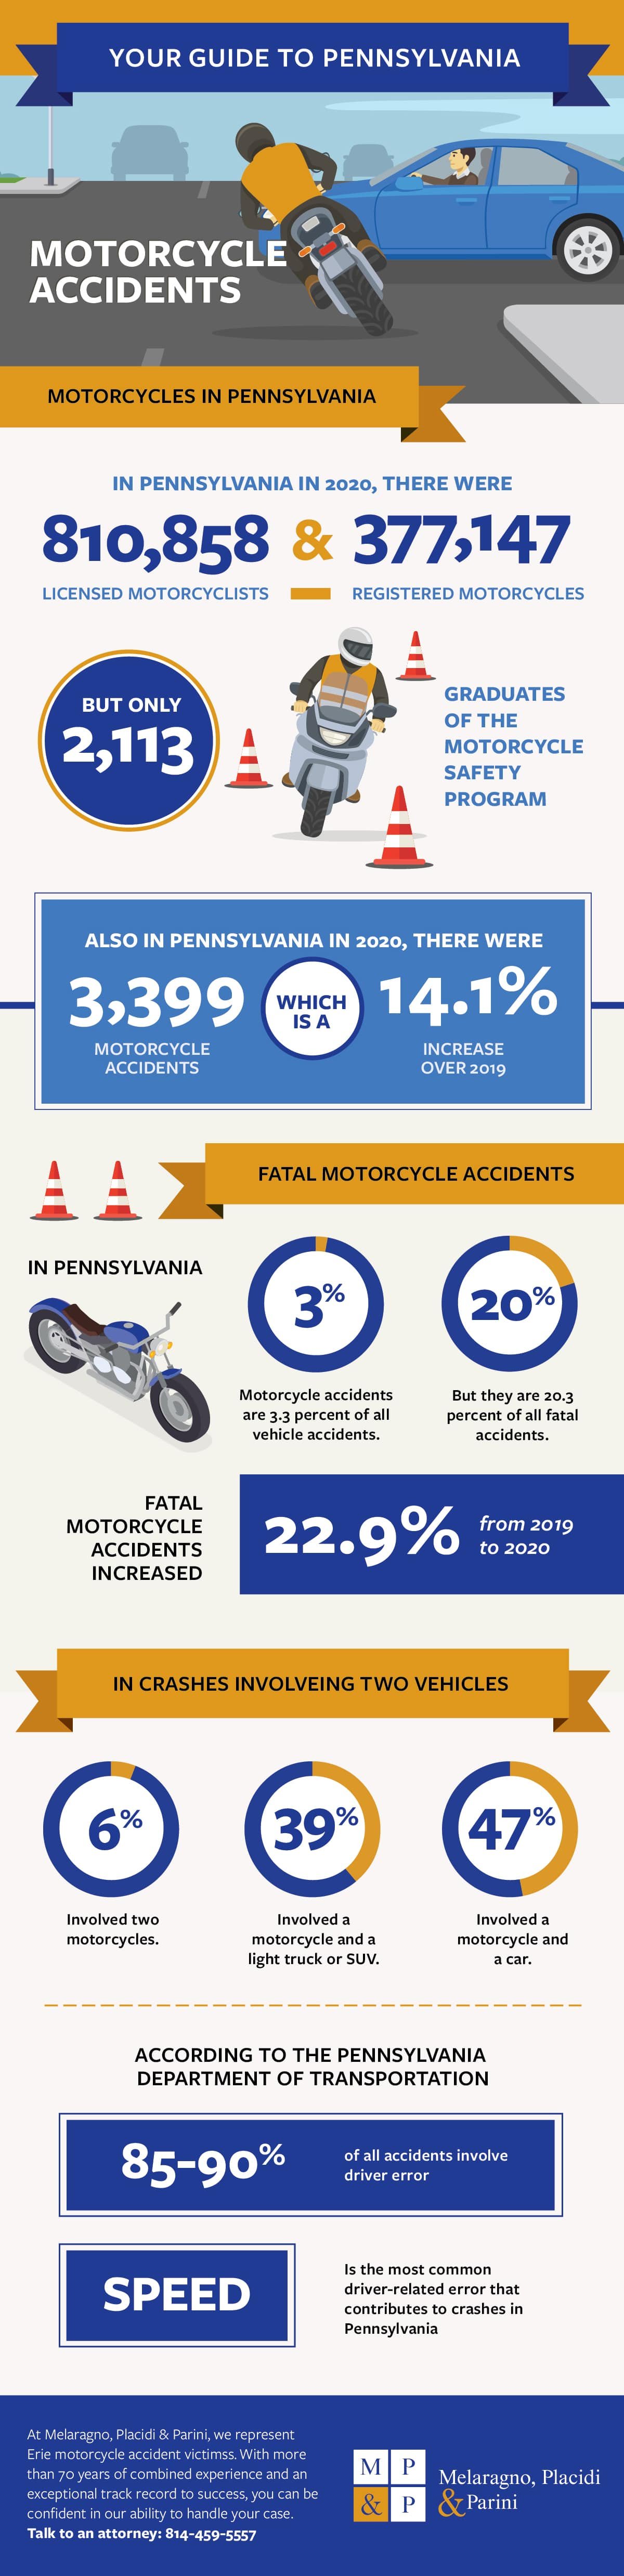 Your Guide to Motorcycle Accidents